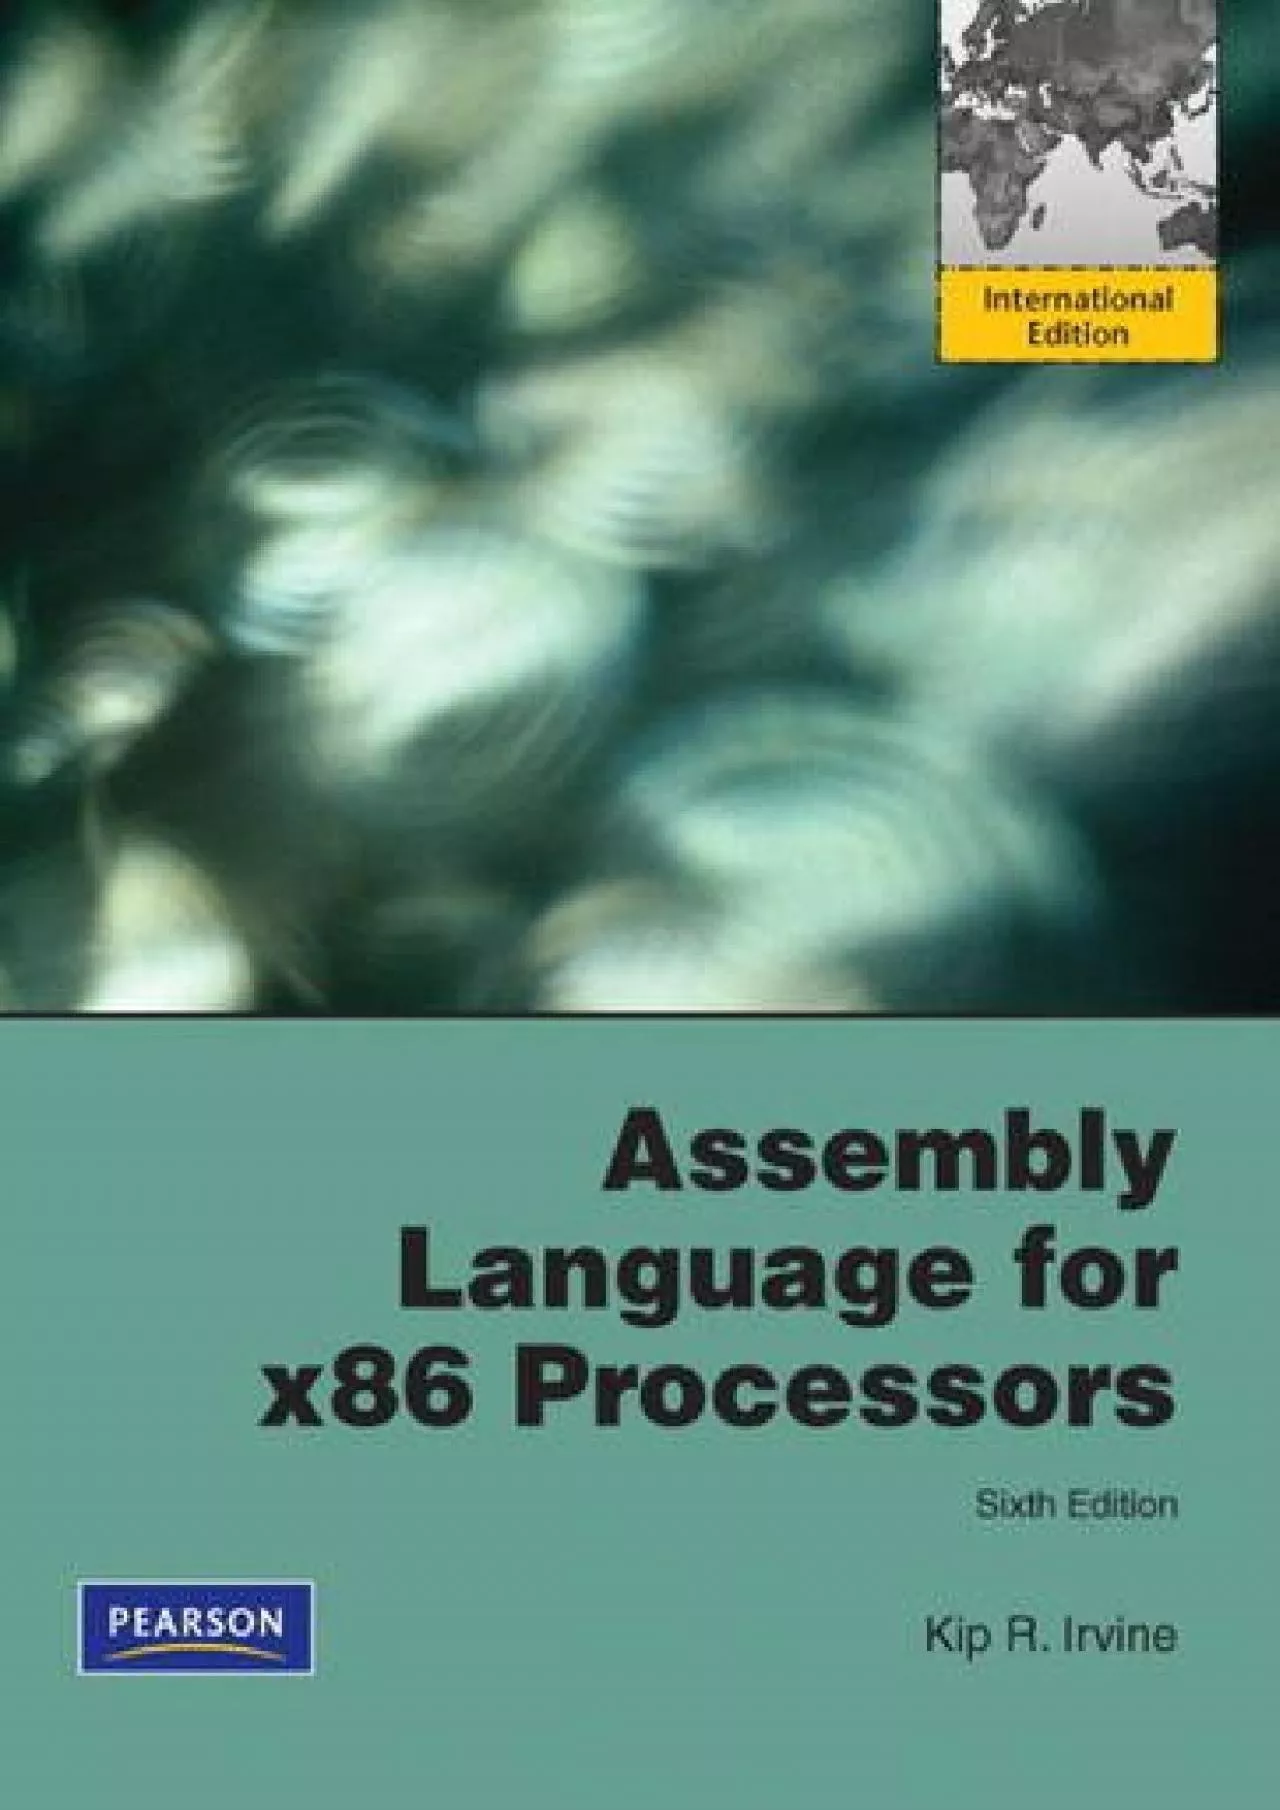 [FREE]-Assembly Language for X86 Processors: International Version by Irvine, Kip R. (2010)